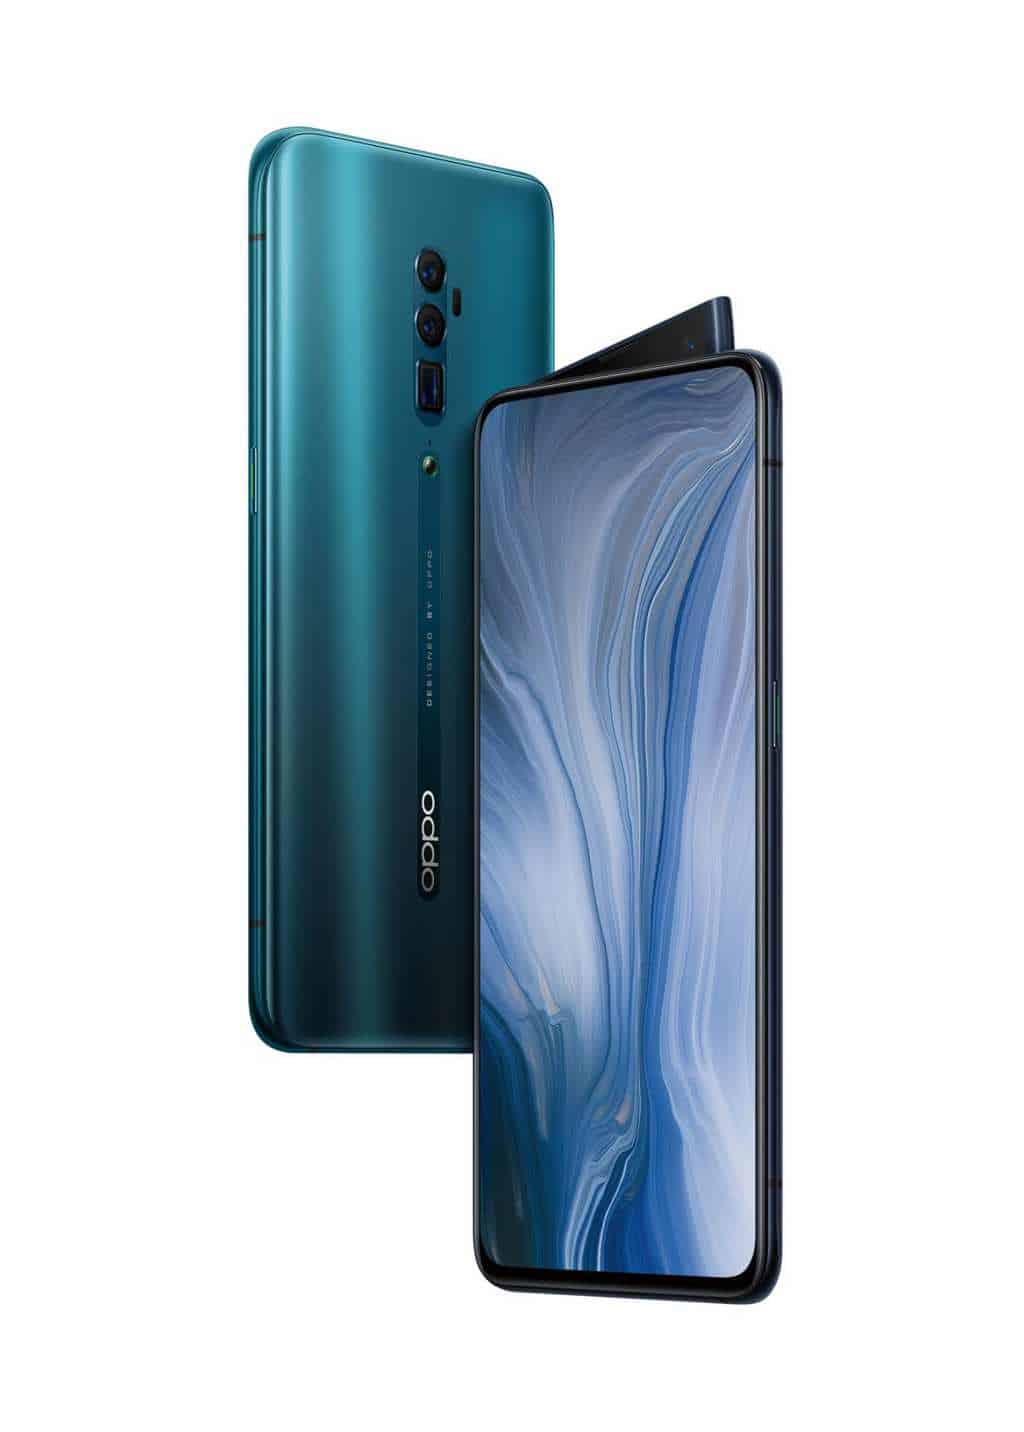 OPPO Reveals Its New Reno Smartphone With 5G Access